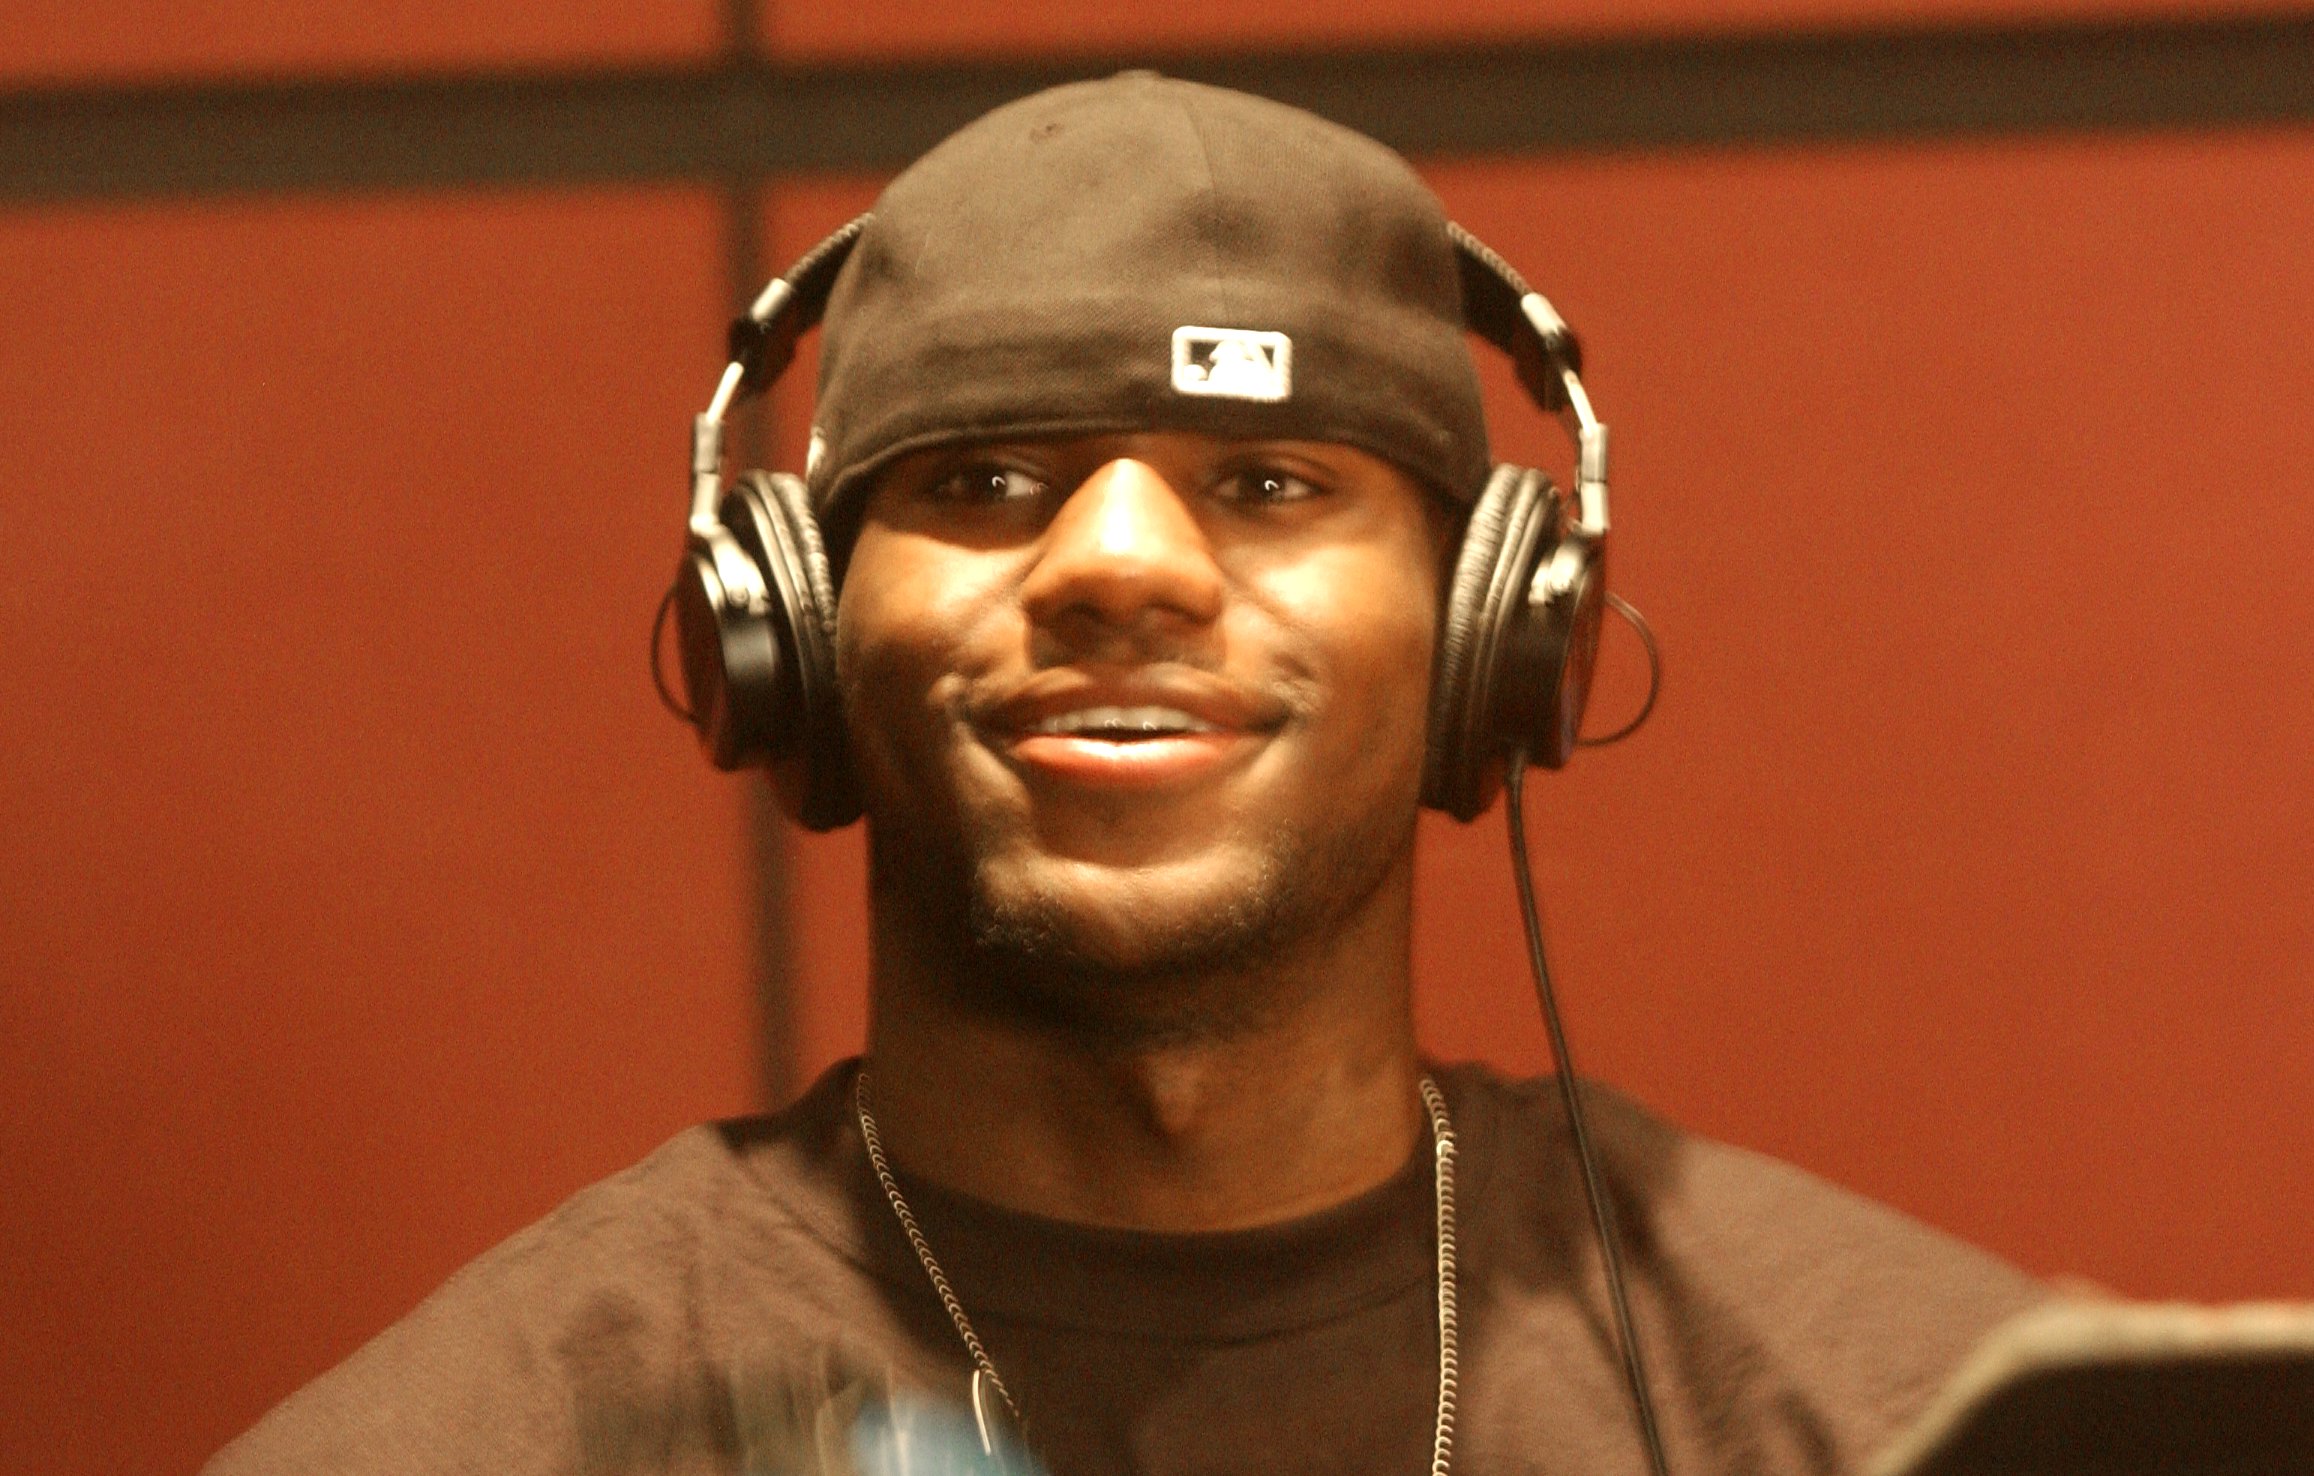 Cleveland Cavaliers 1st round draft pick, LeBron James, wears a set if headphones while taping a radio ad for the upcoming basketball season Thursday, Sept. 4, 2003, Independence, Ohio.  (Dale Omori/The Plain Dealer) 